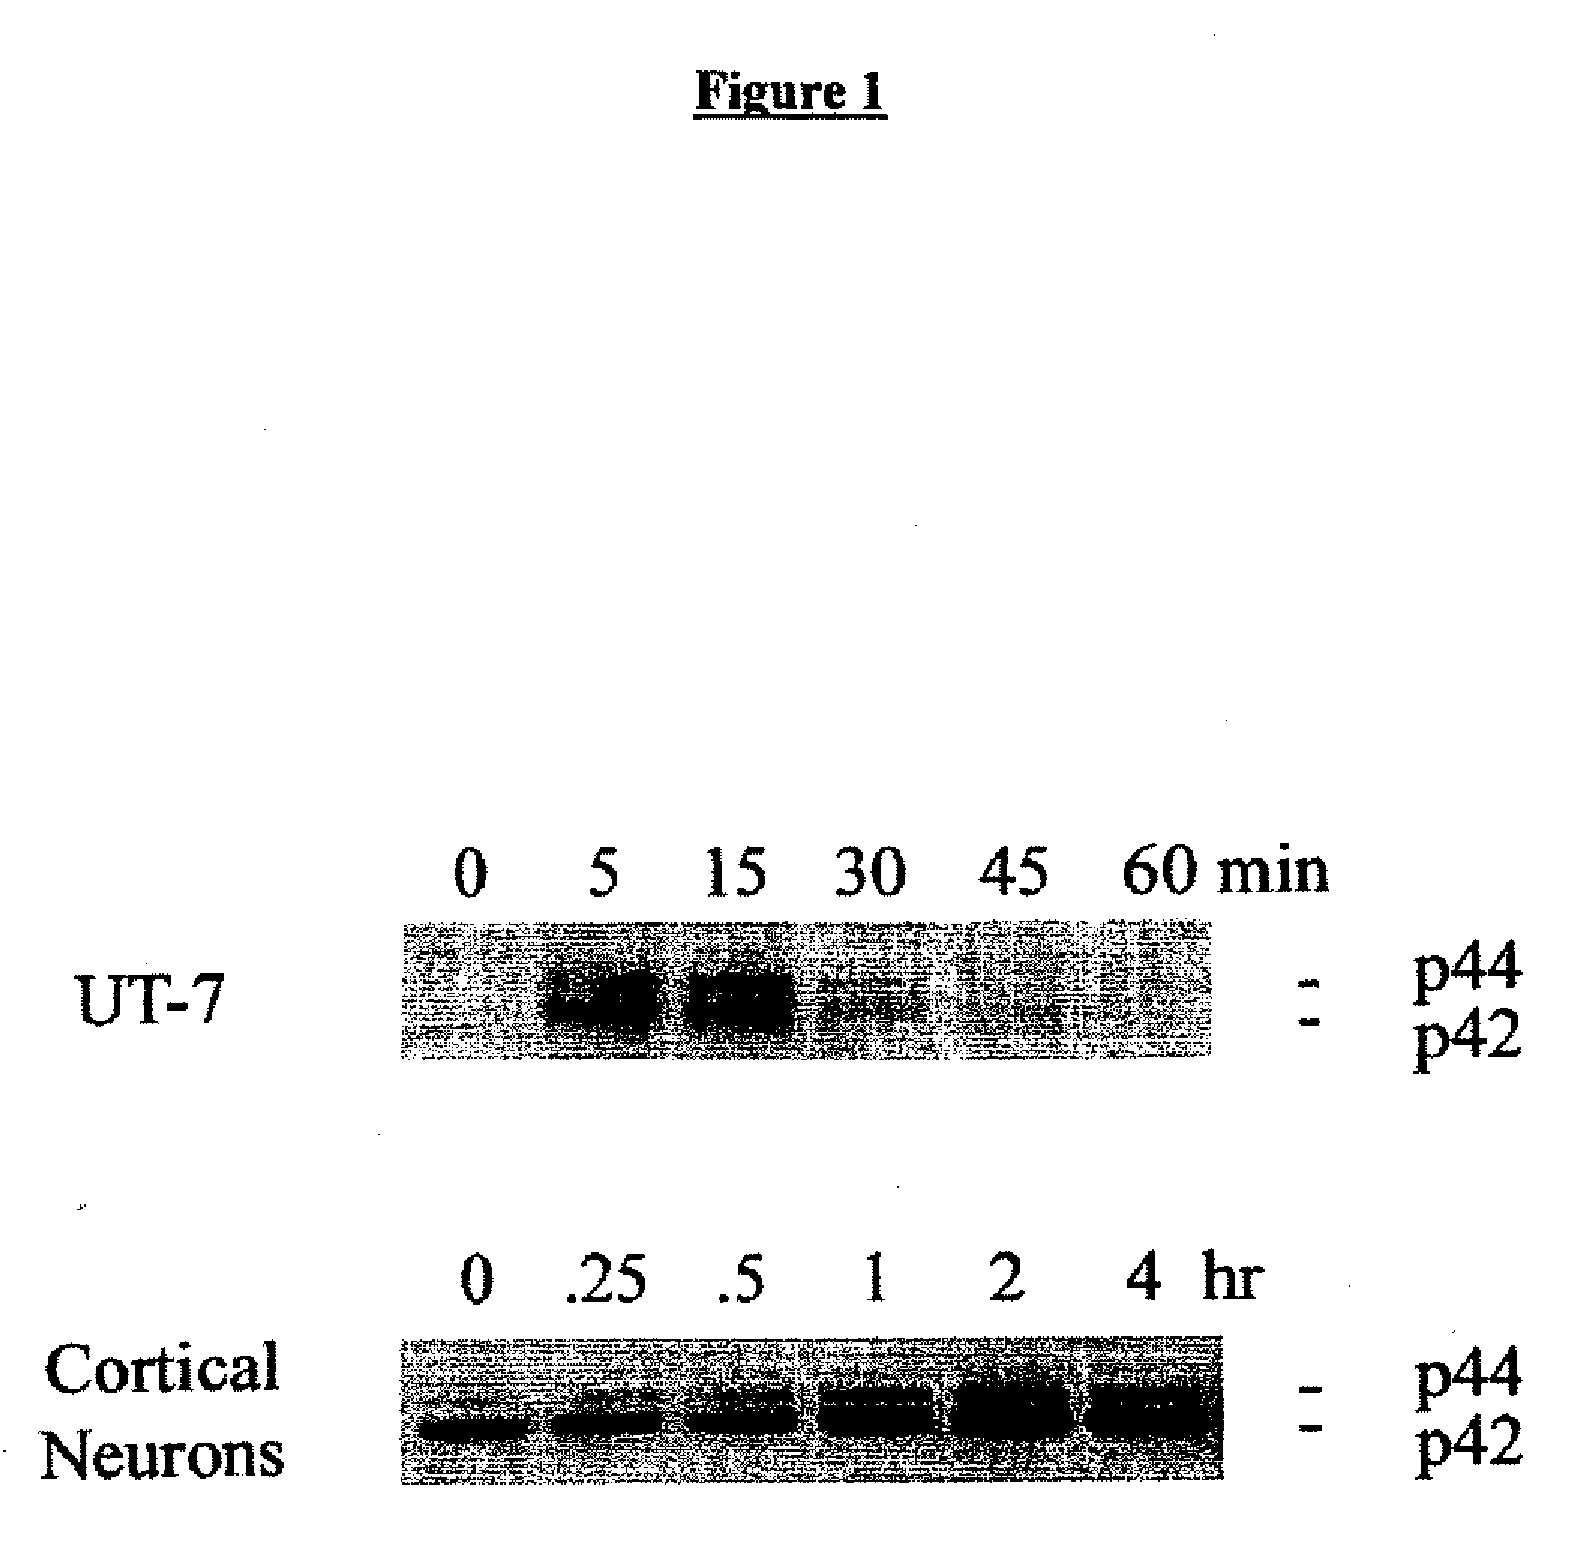 Methods for shp1 mediated neuroprotection